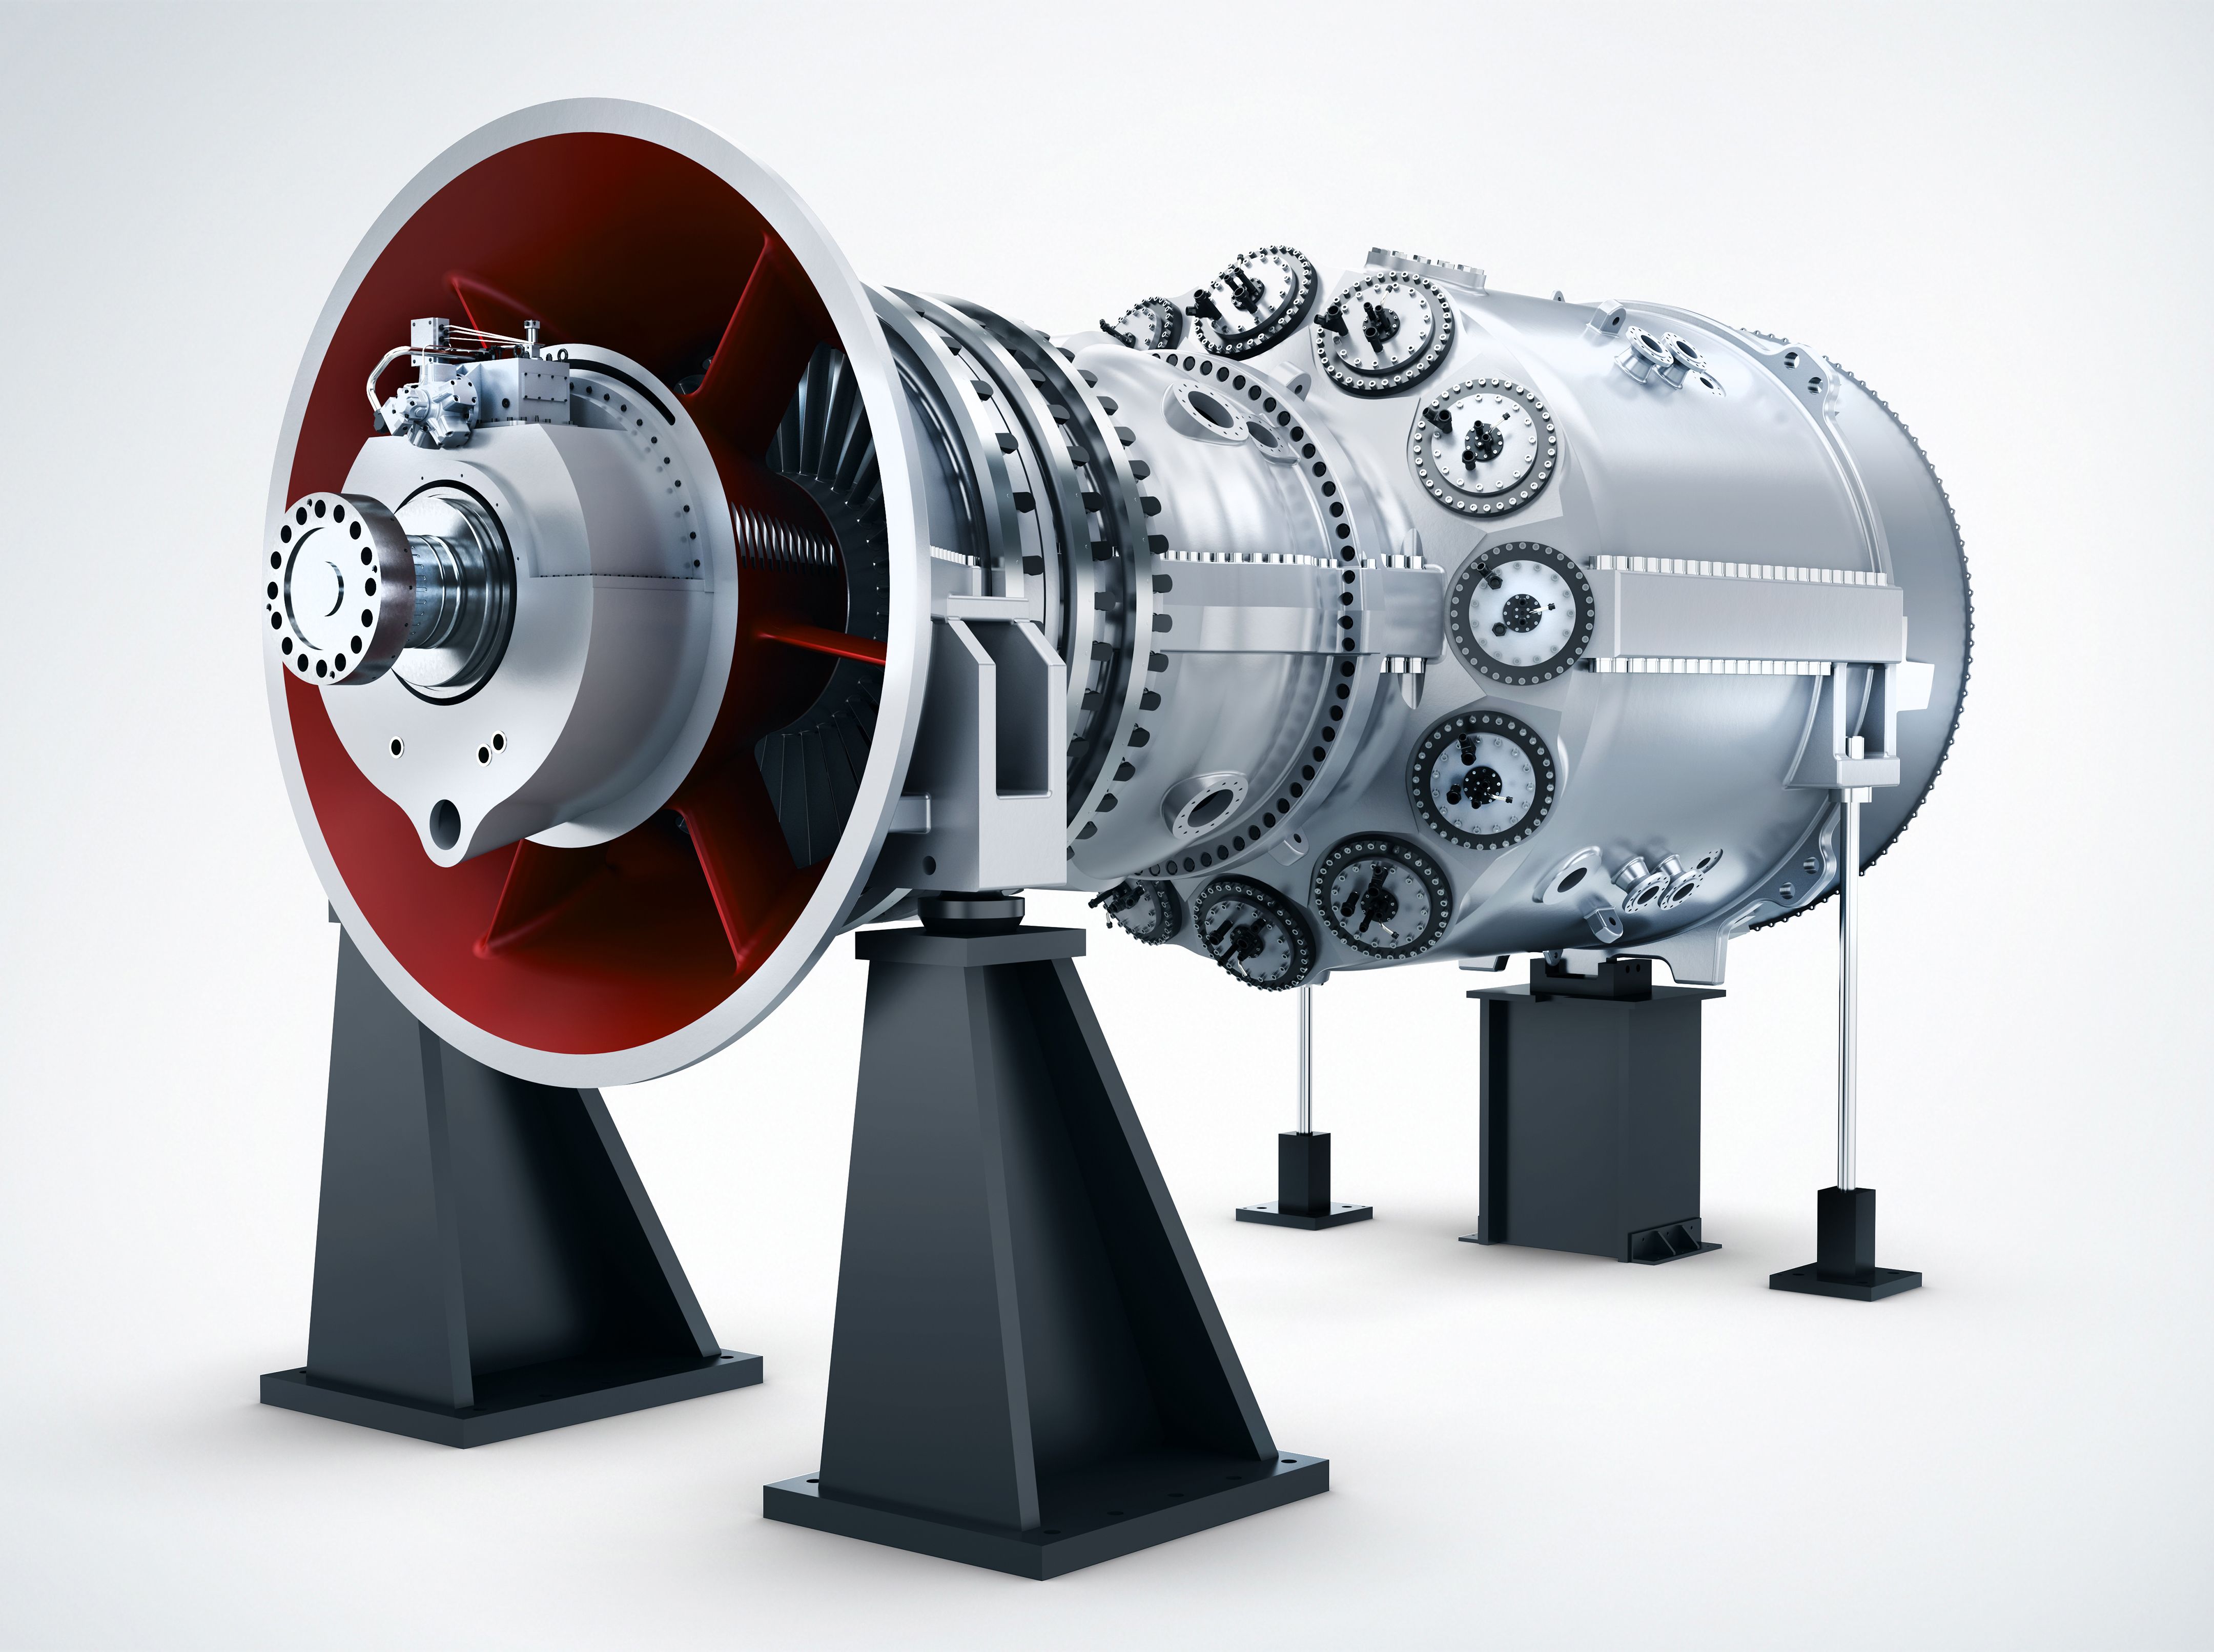 Siemens secures order for HL-class gas turbine in the U.S.